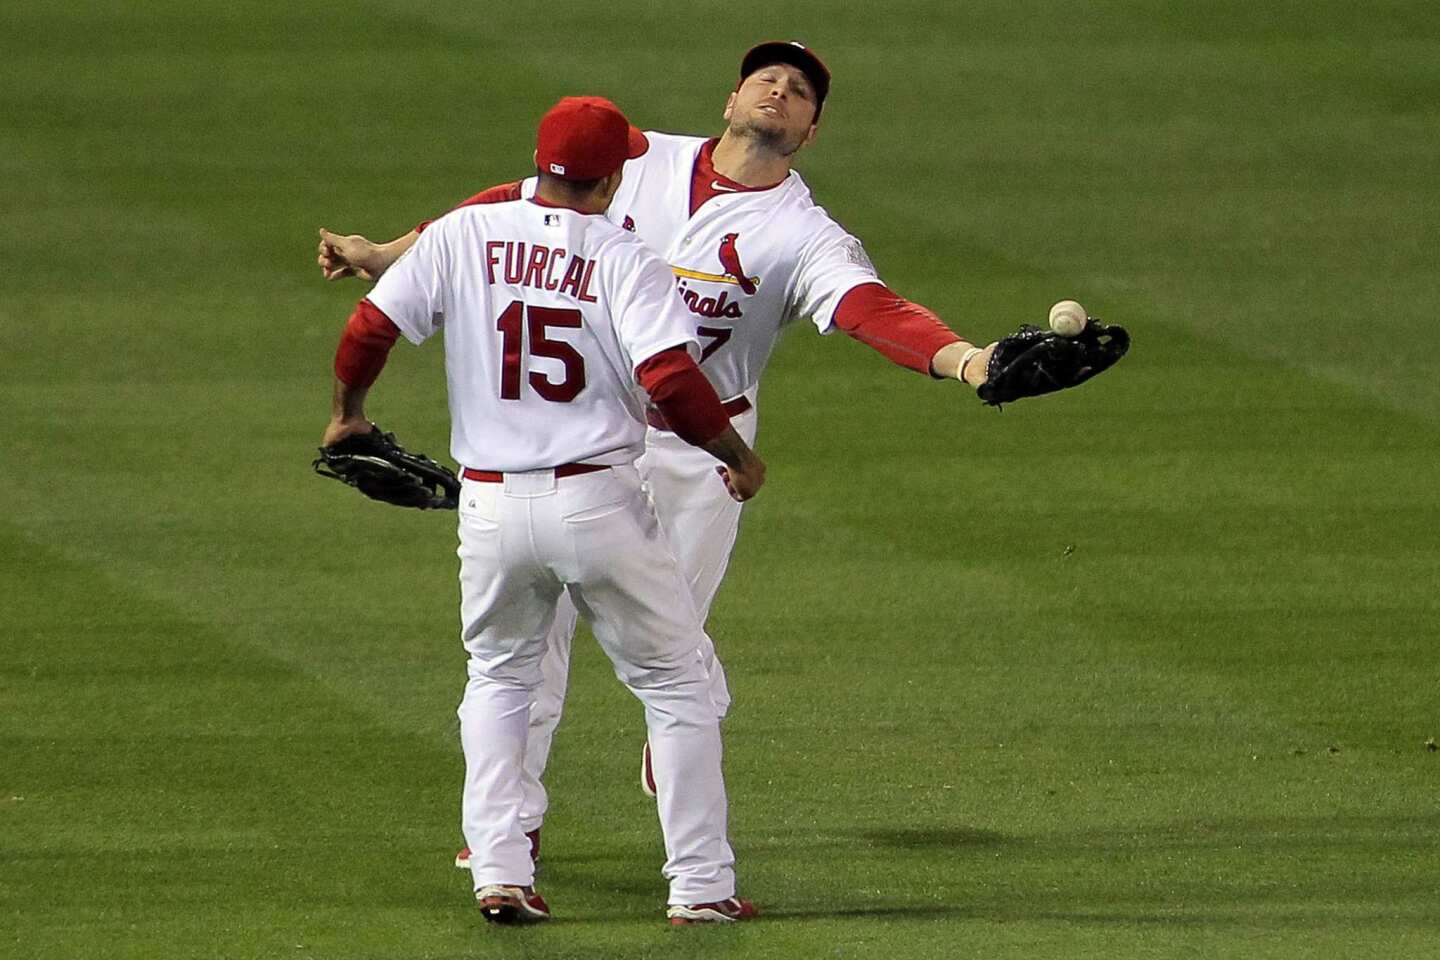 Photo: Cardinals Rafael Furcal jumps over Texas Rangers Mike Napoli during  the World Series in Texas - ARL20111023214 